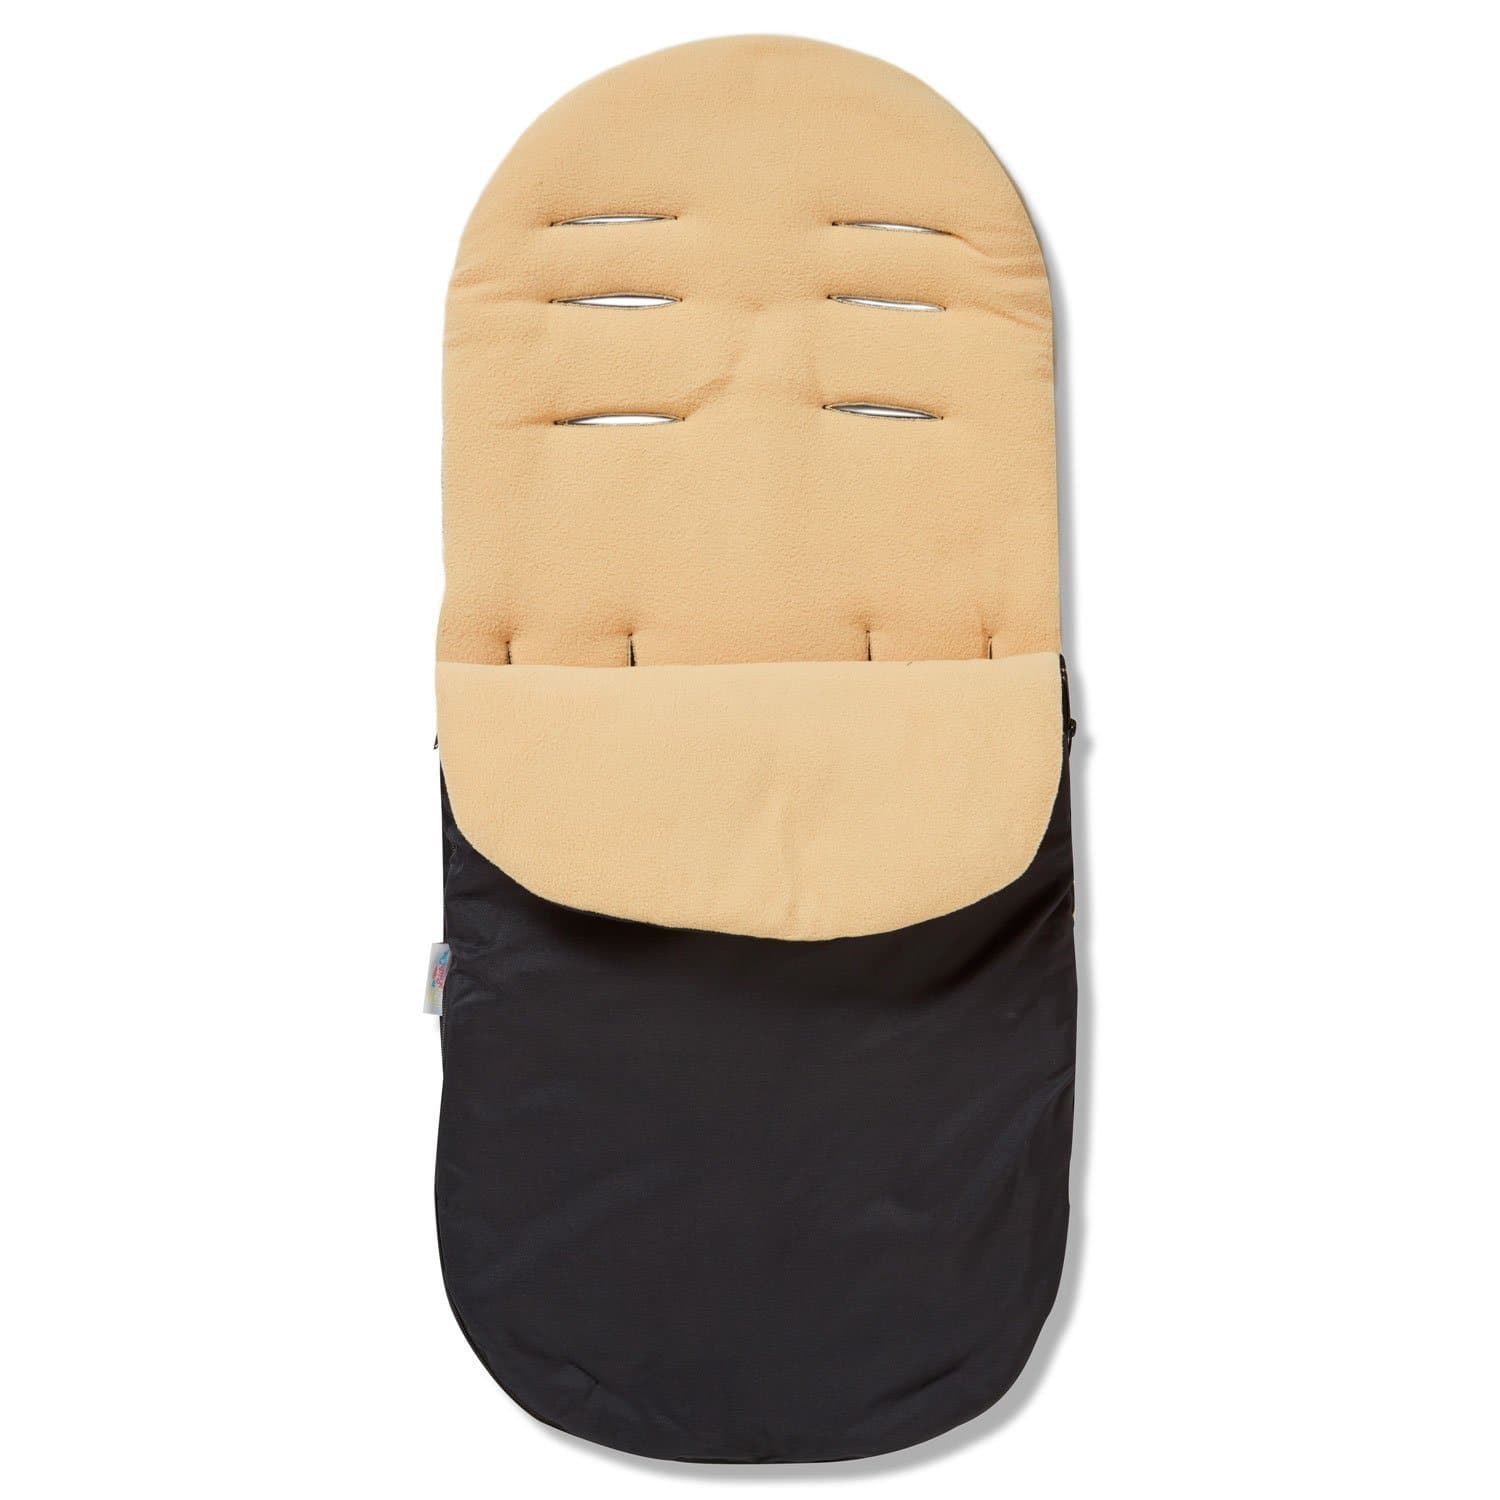 Footmuff / Cosy Toes Compatible with Red Kite - Sand / Fits All Models | For Your Little One